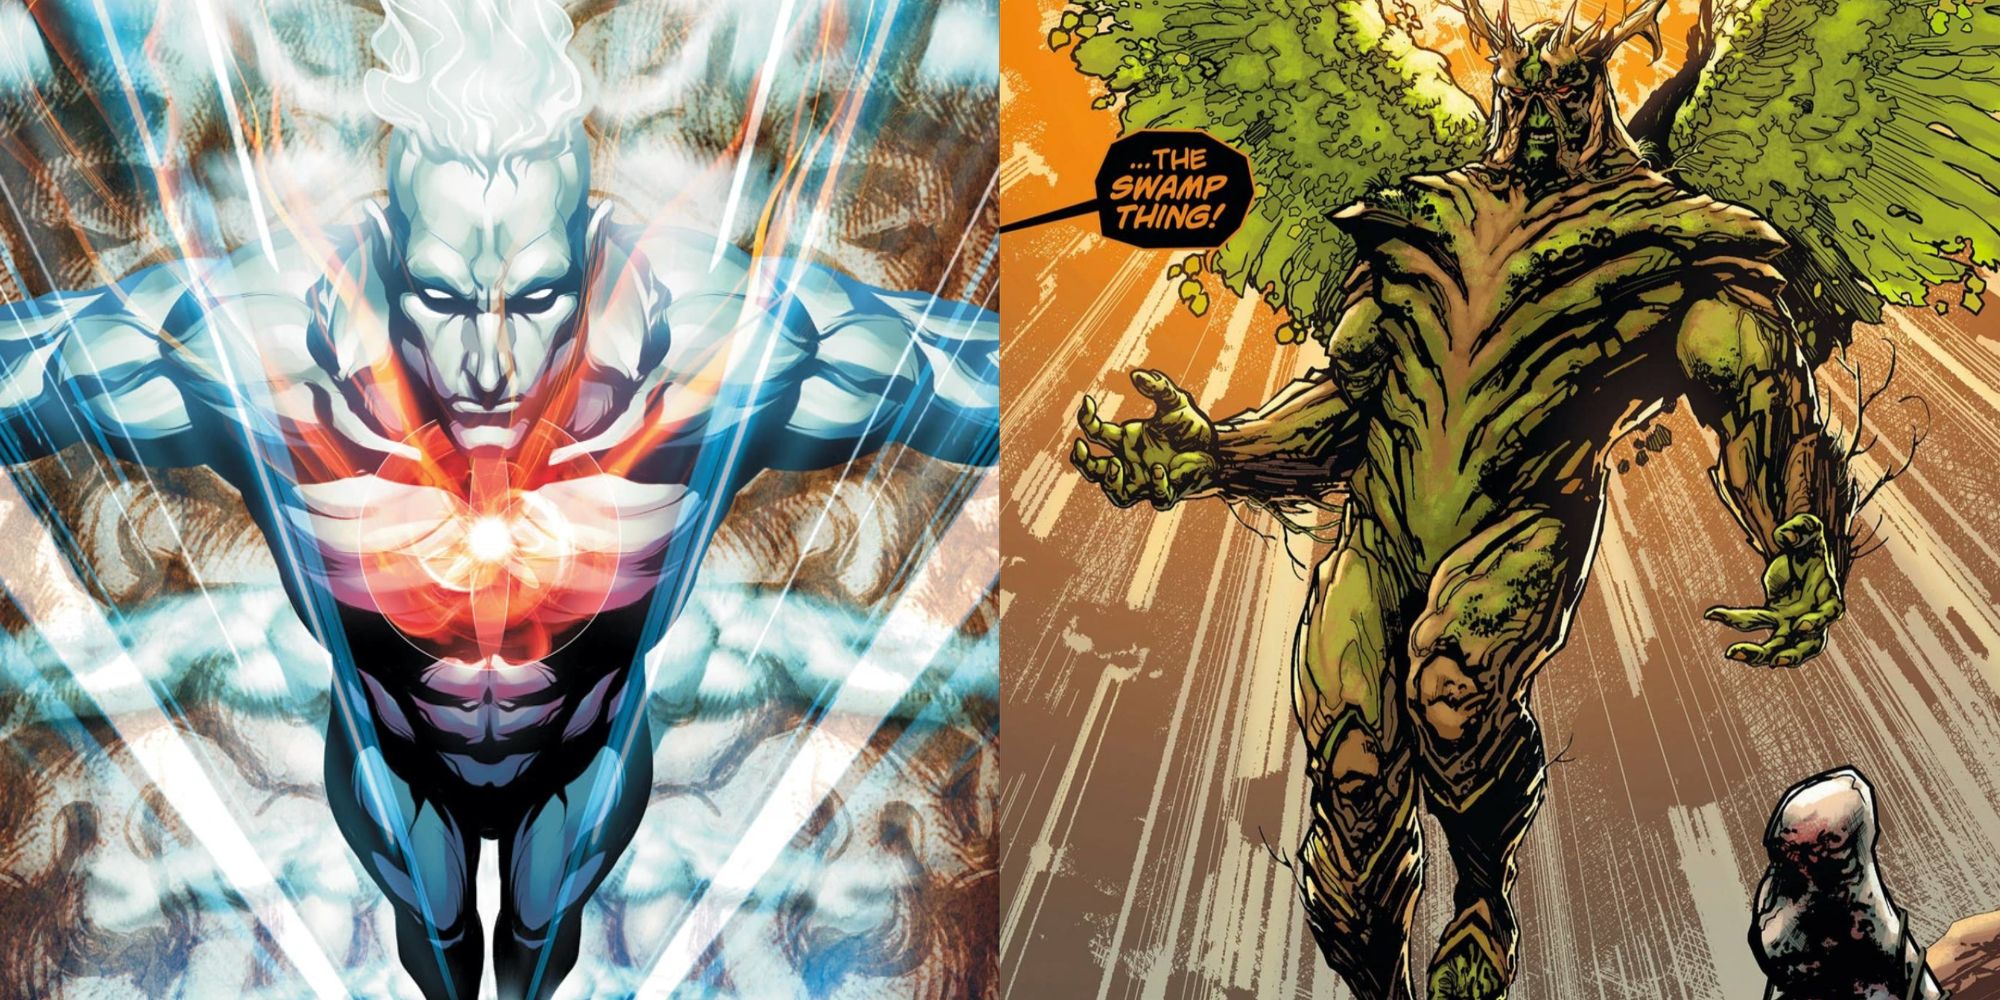 A split image of DC Comics' Captain Atom and Swamp Thing.